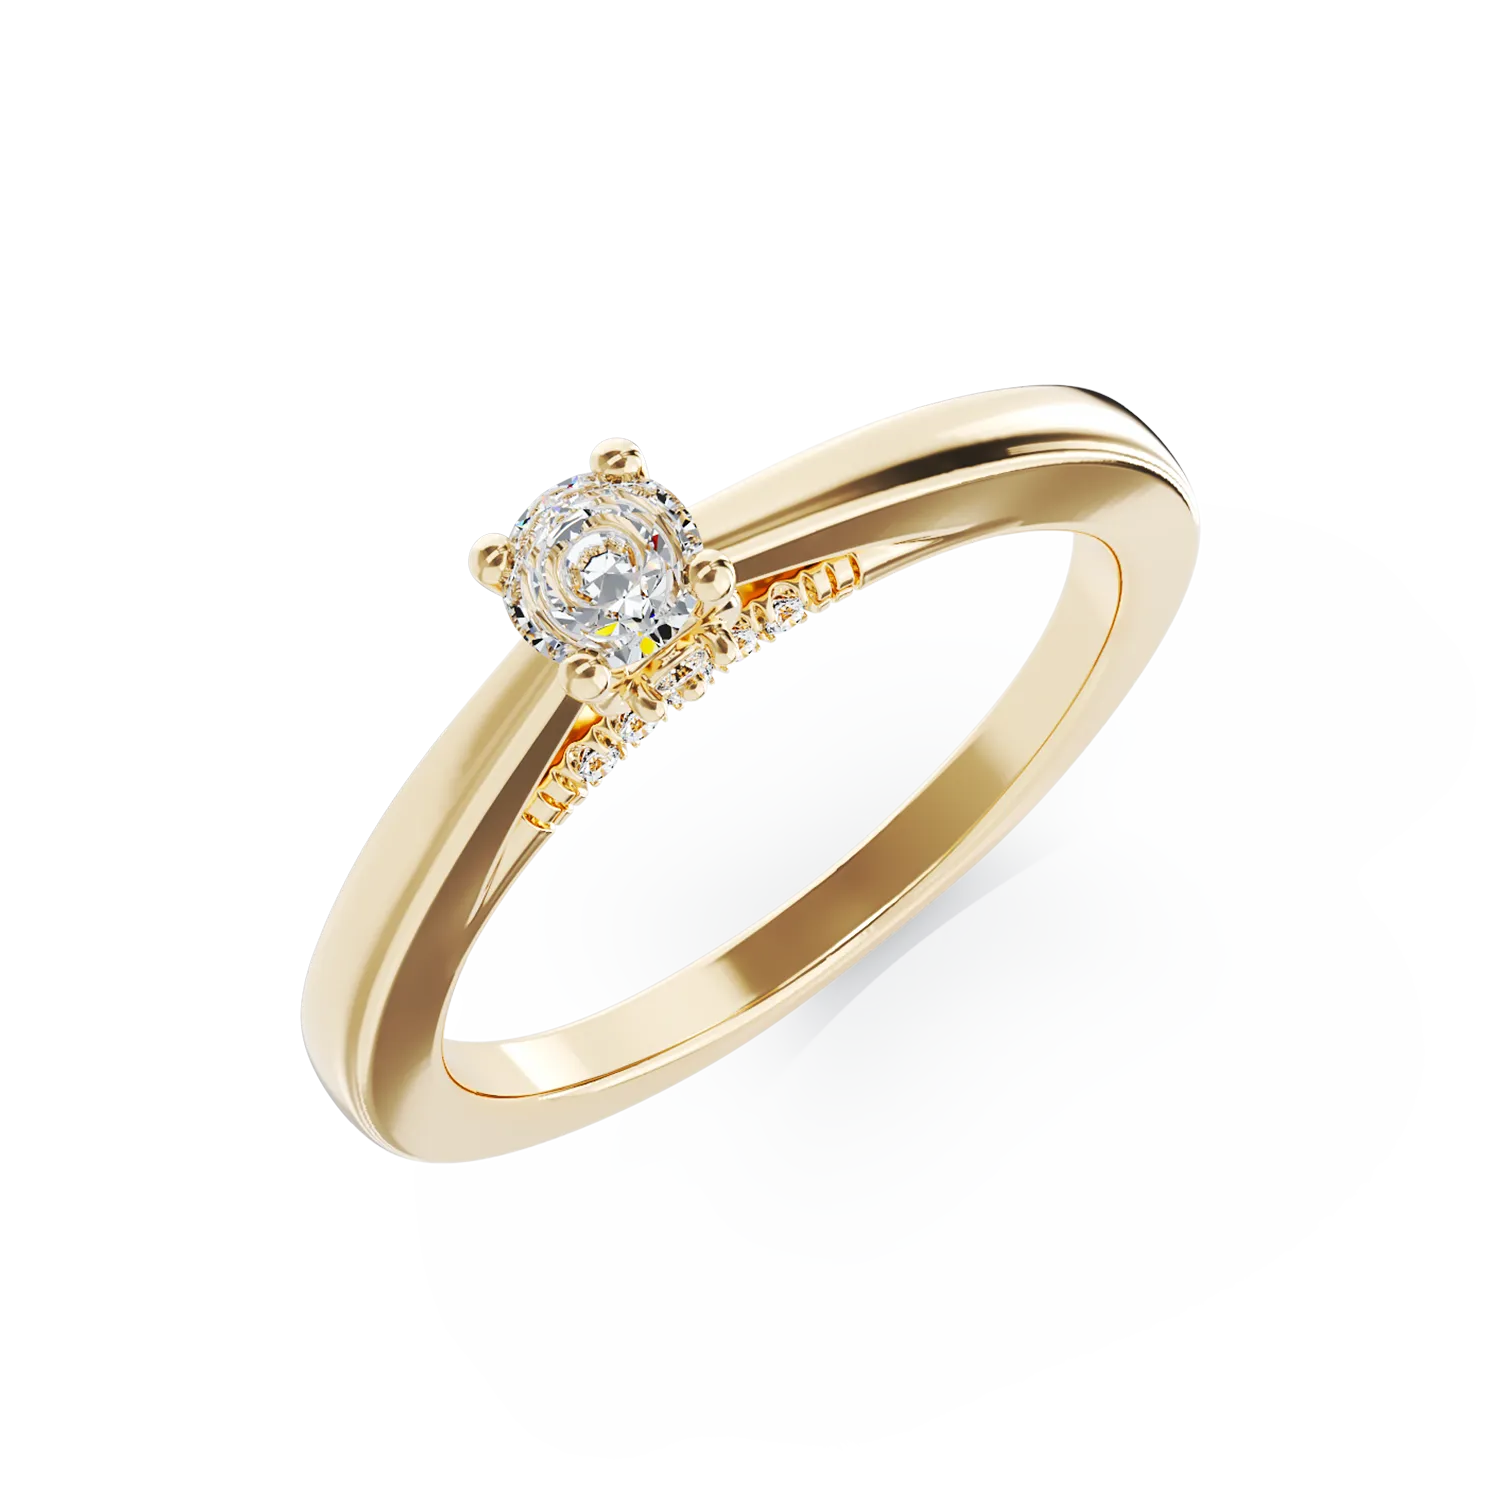 Yellow gold engagement ring with 0.1ct diamond and 0.06ct diamonds